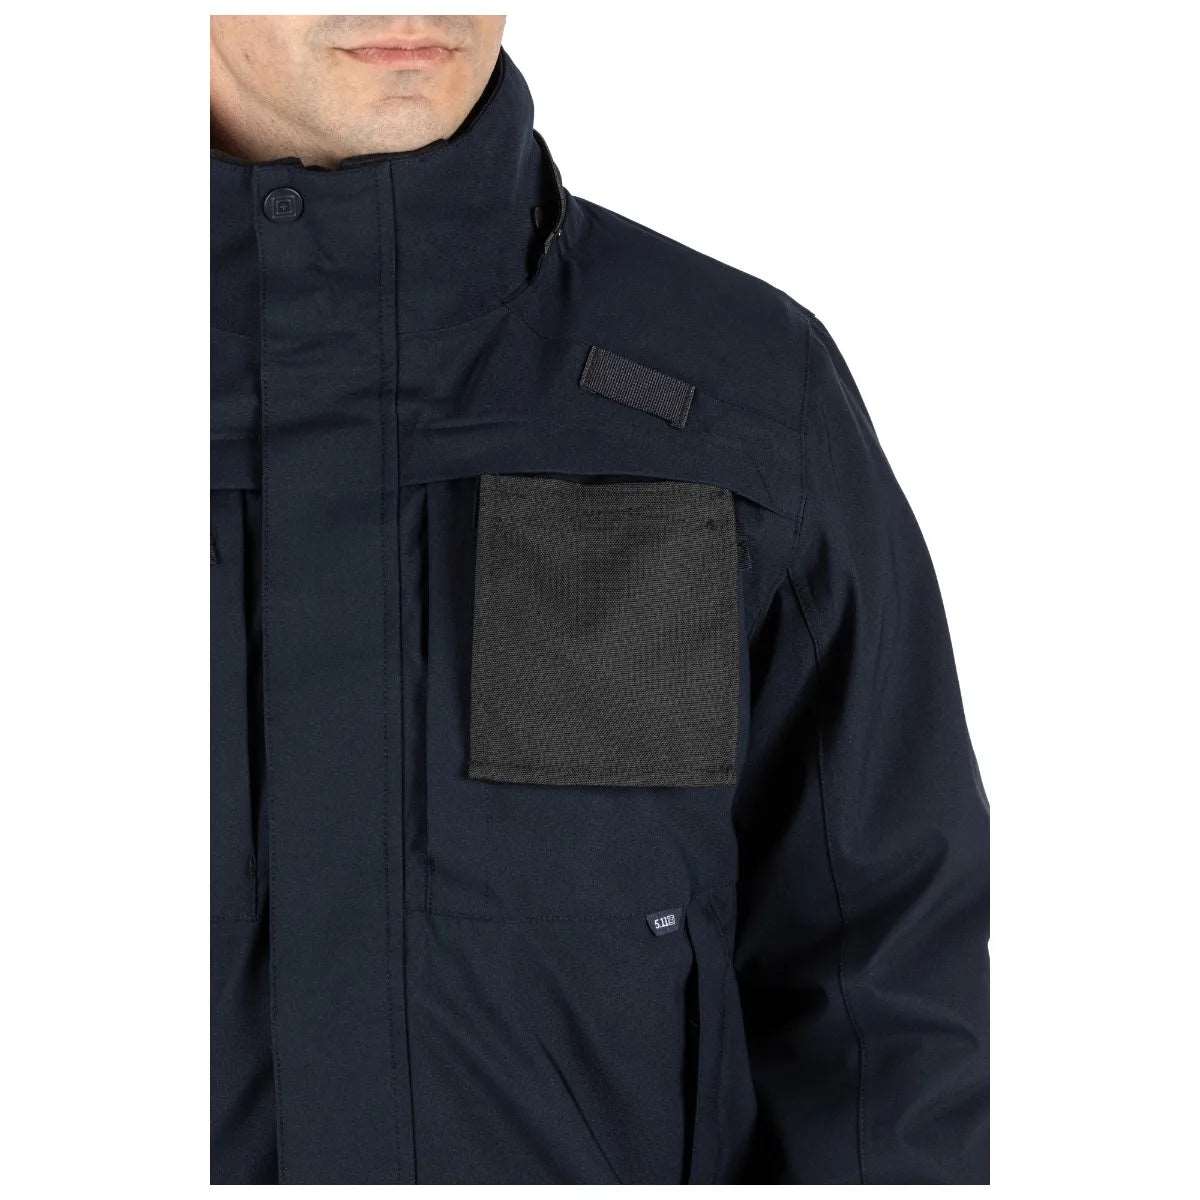 Outerwear - 5.11 Tactical 5-in-1 Jacket 2.0